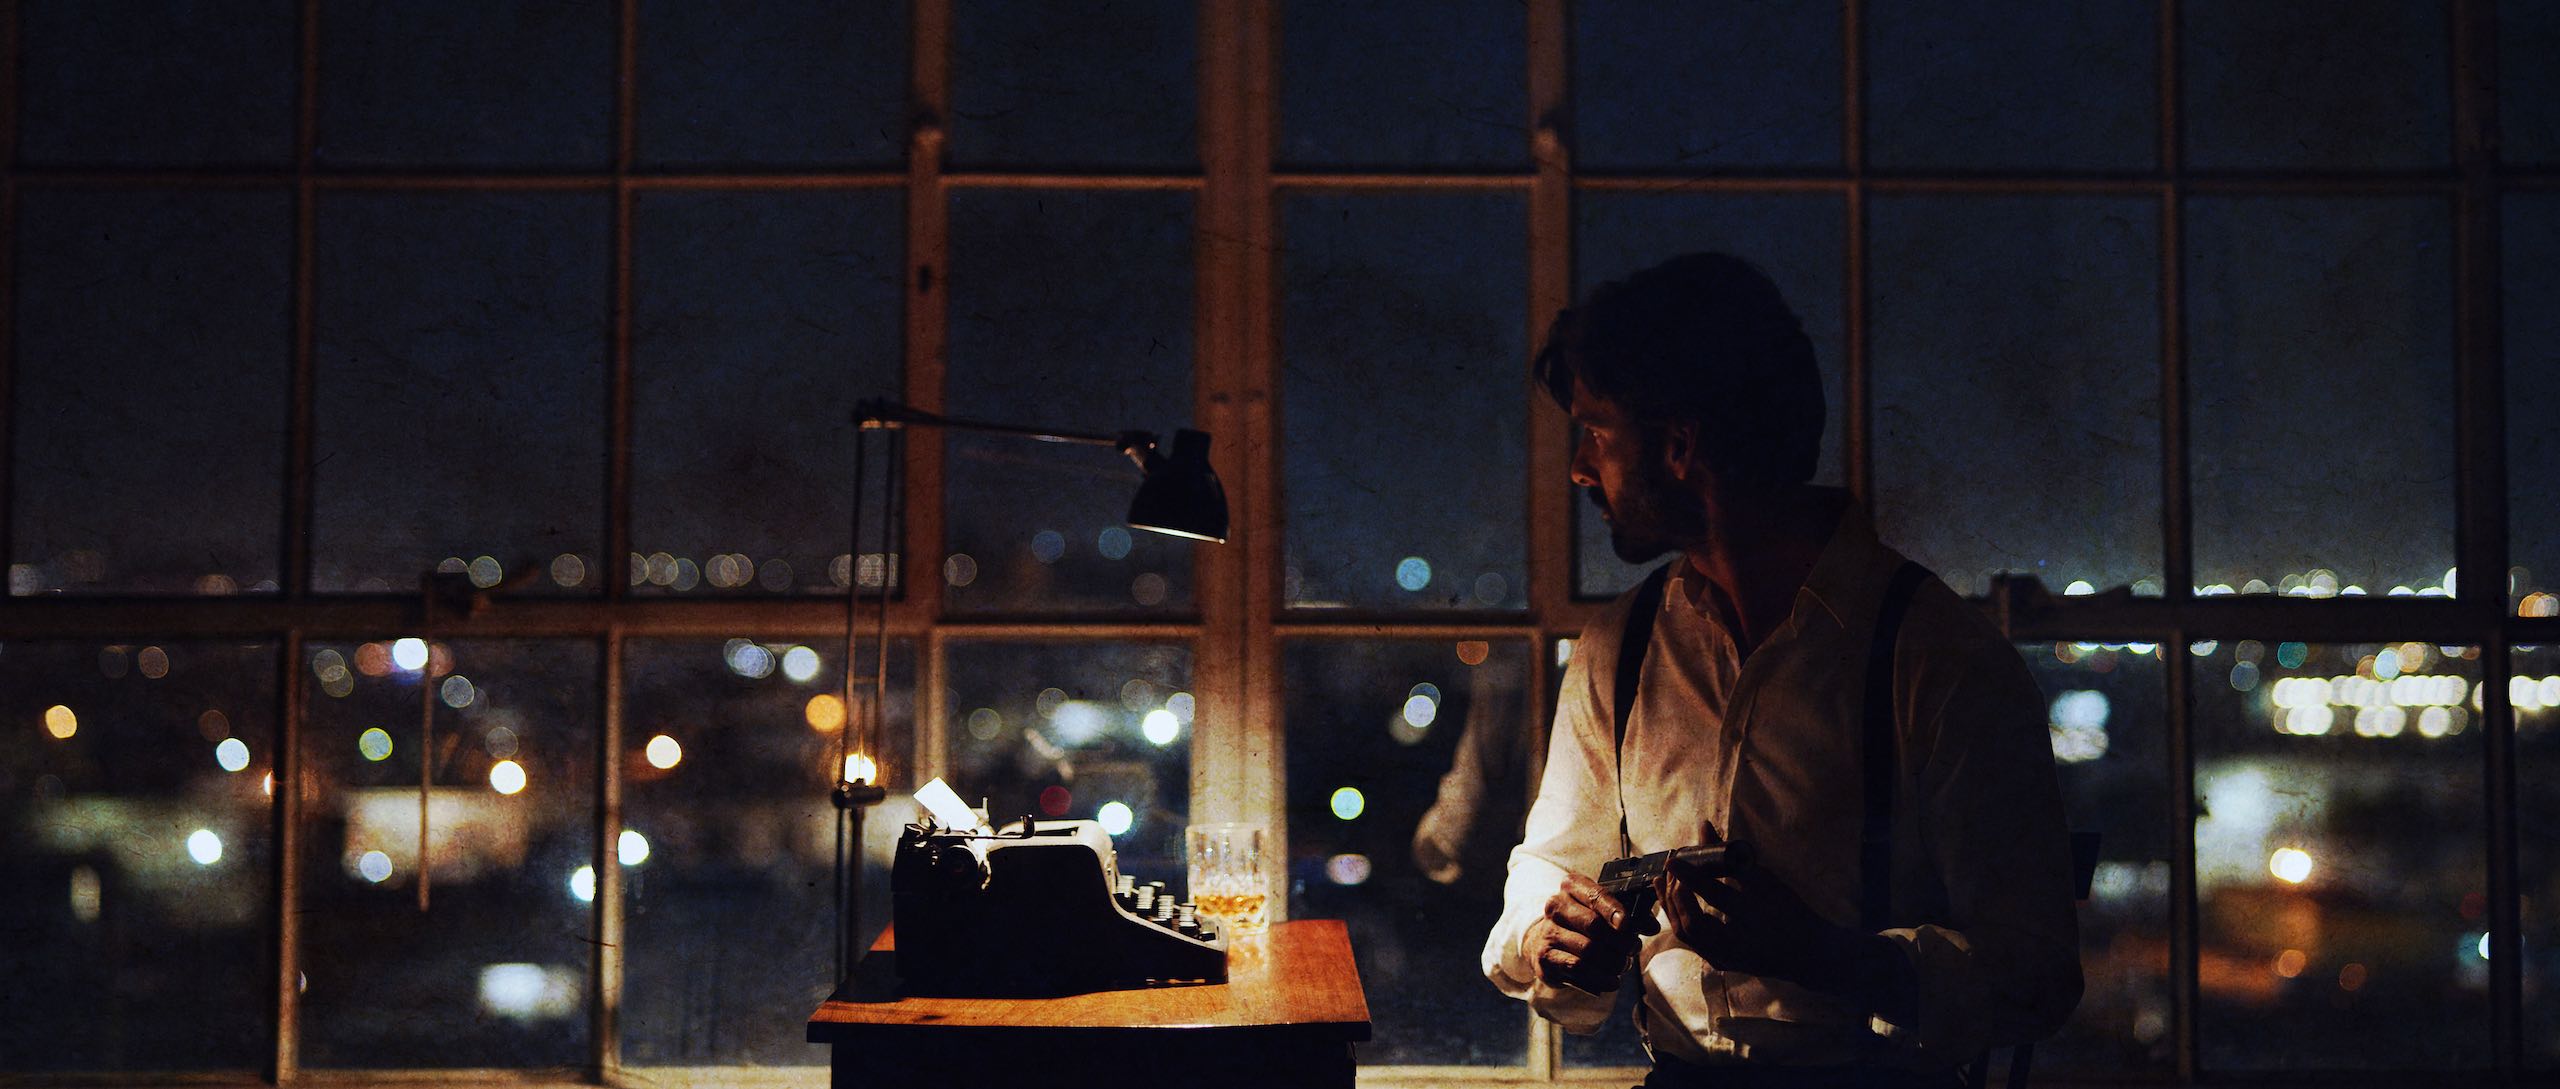 Side profile of a man sitting by a typewriter